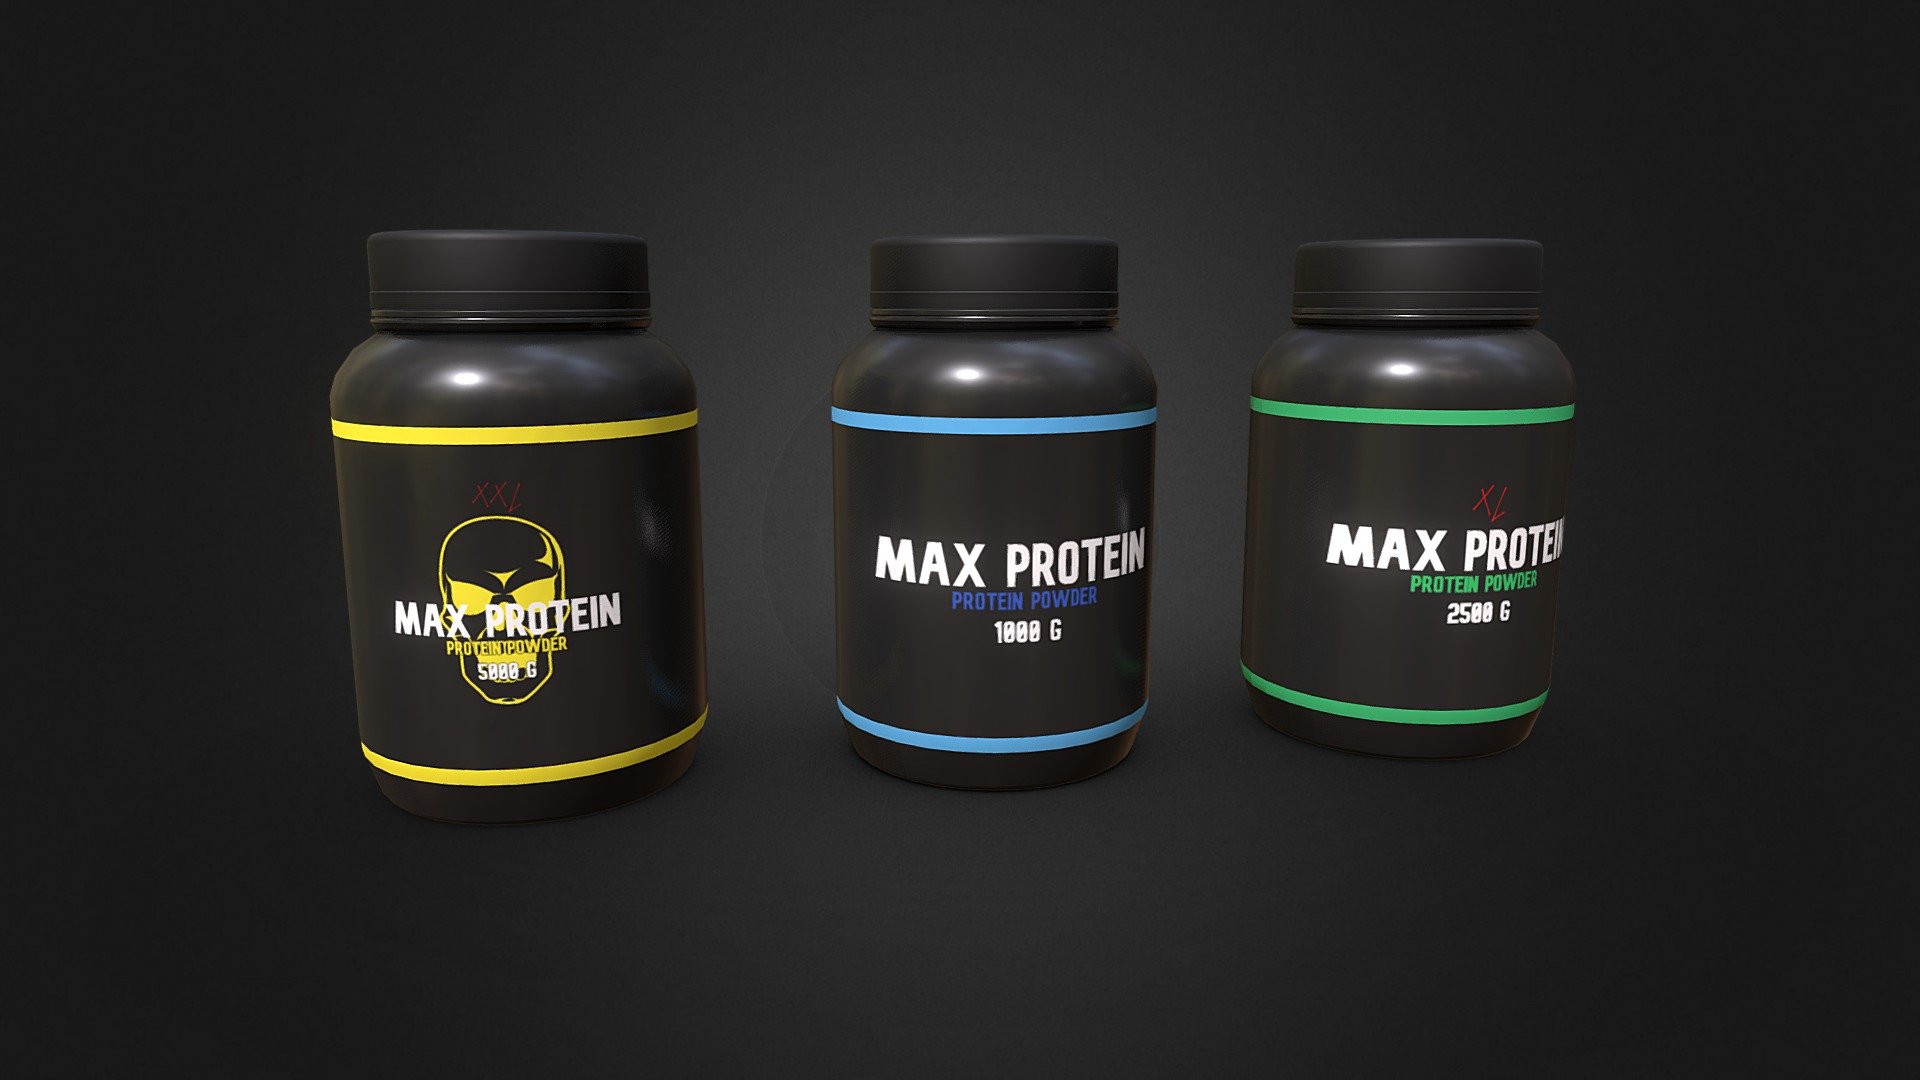 Made three protein powder containers in blender
Note: The textures are not made by me but are done by pixlds - Protein Powder Containers - 3D model by ARKBlender (@ARKS-3D-Studio) 3d model